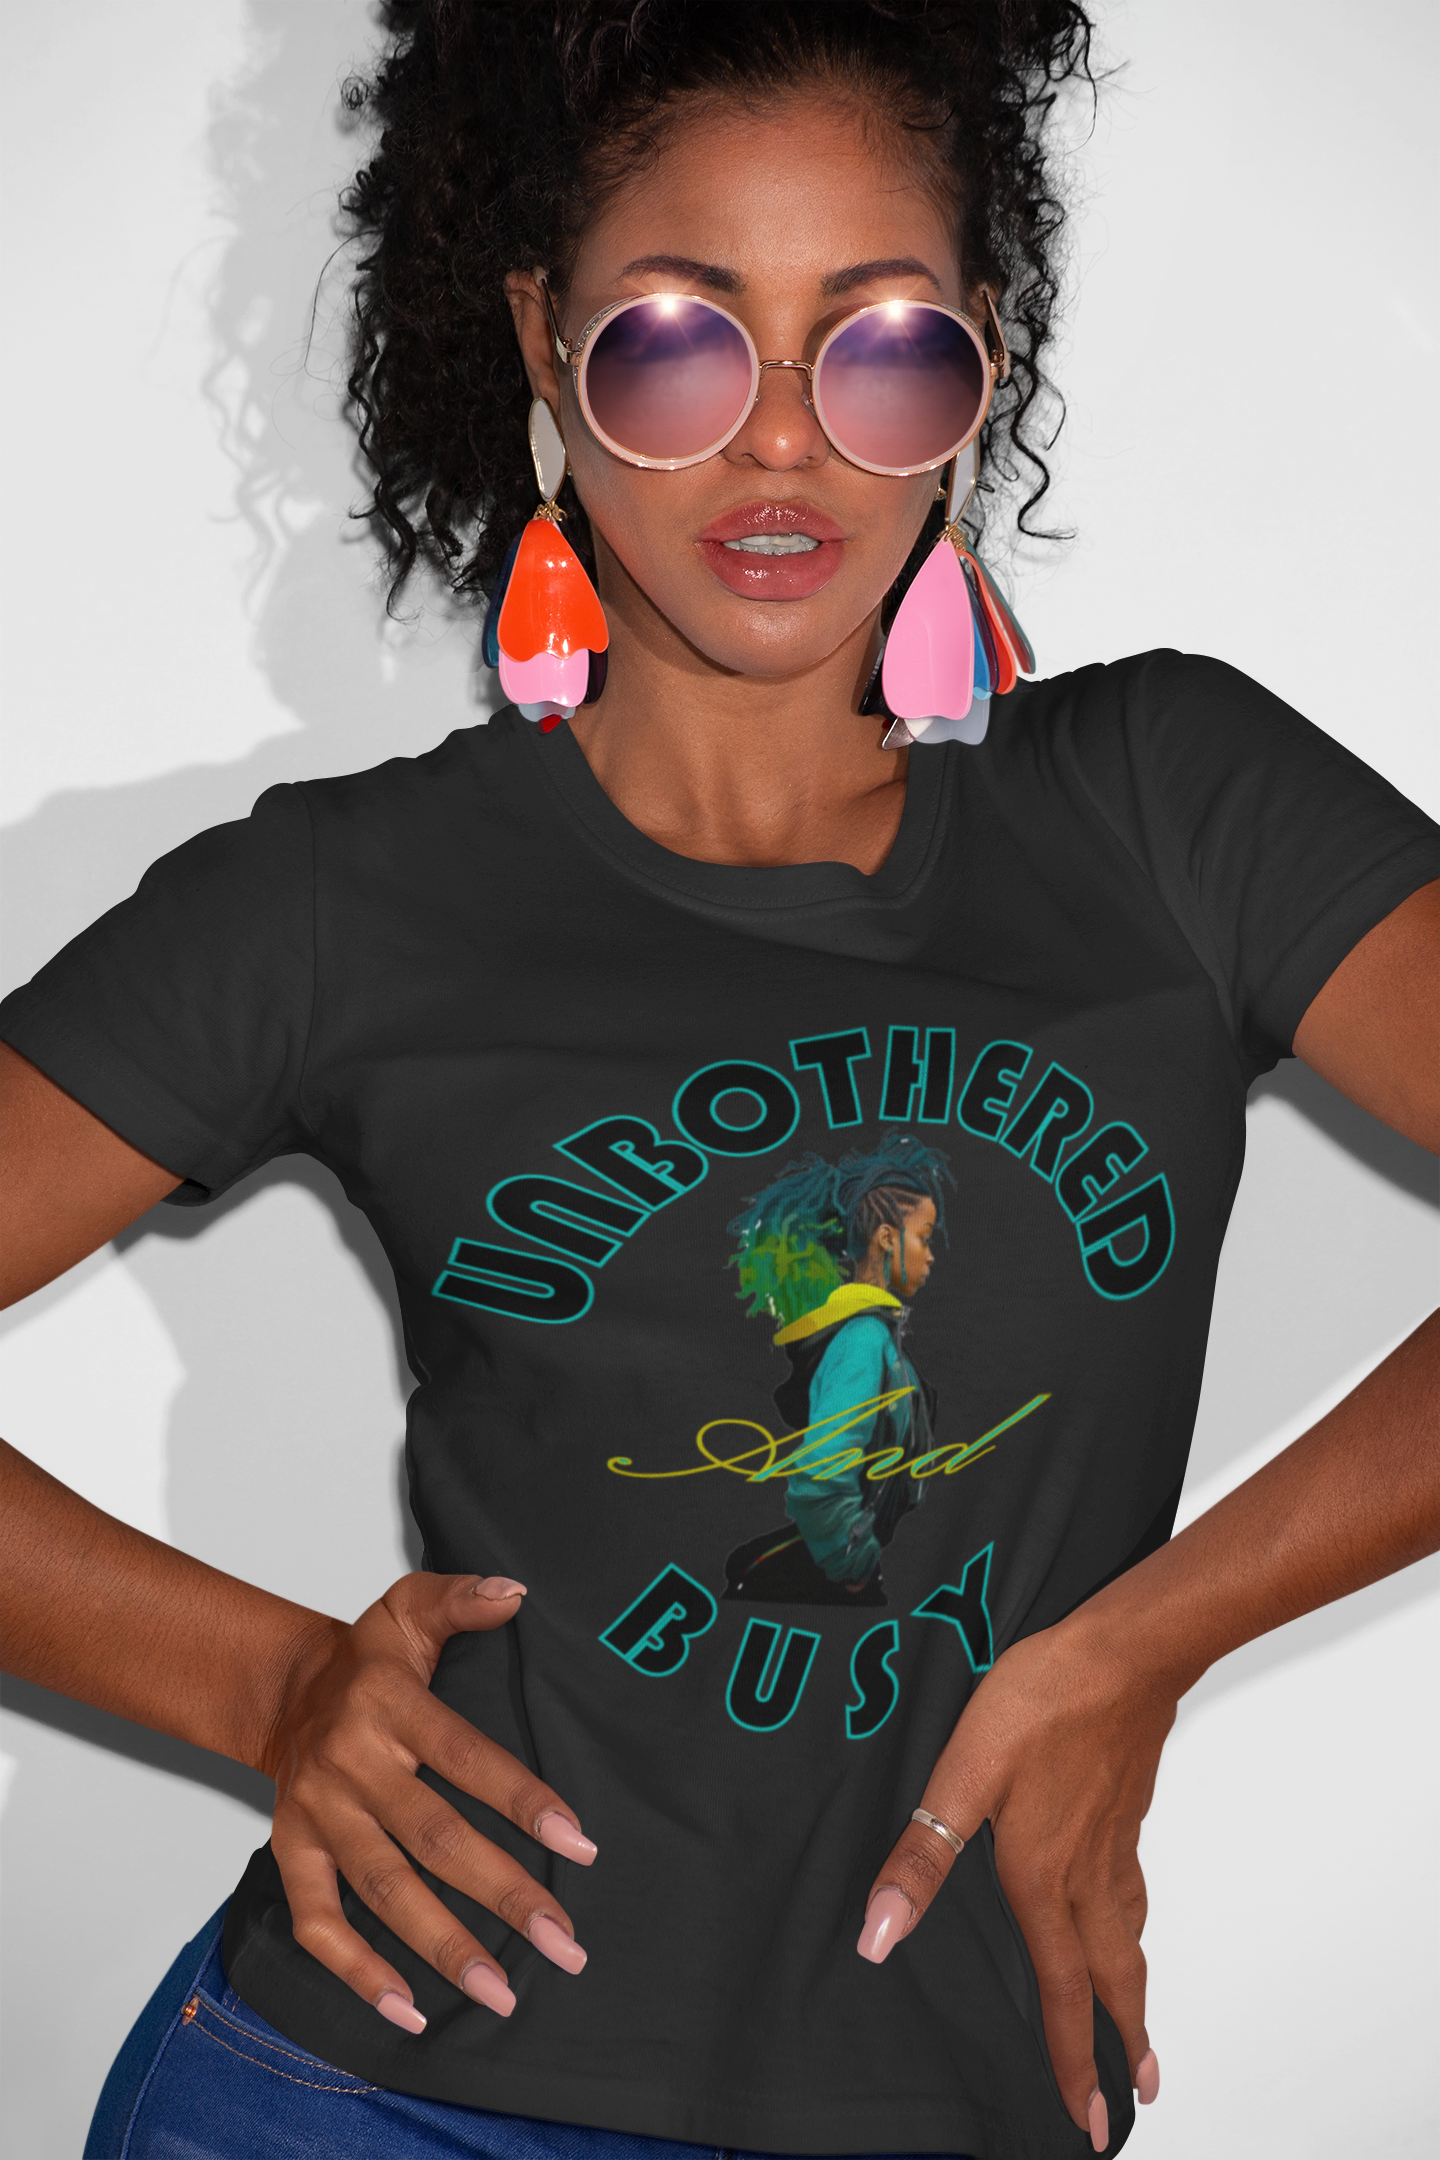 Unbothered & Busy Graphic T-shirt